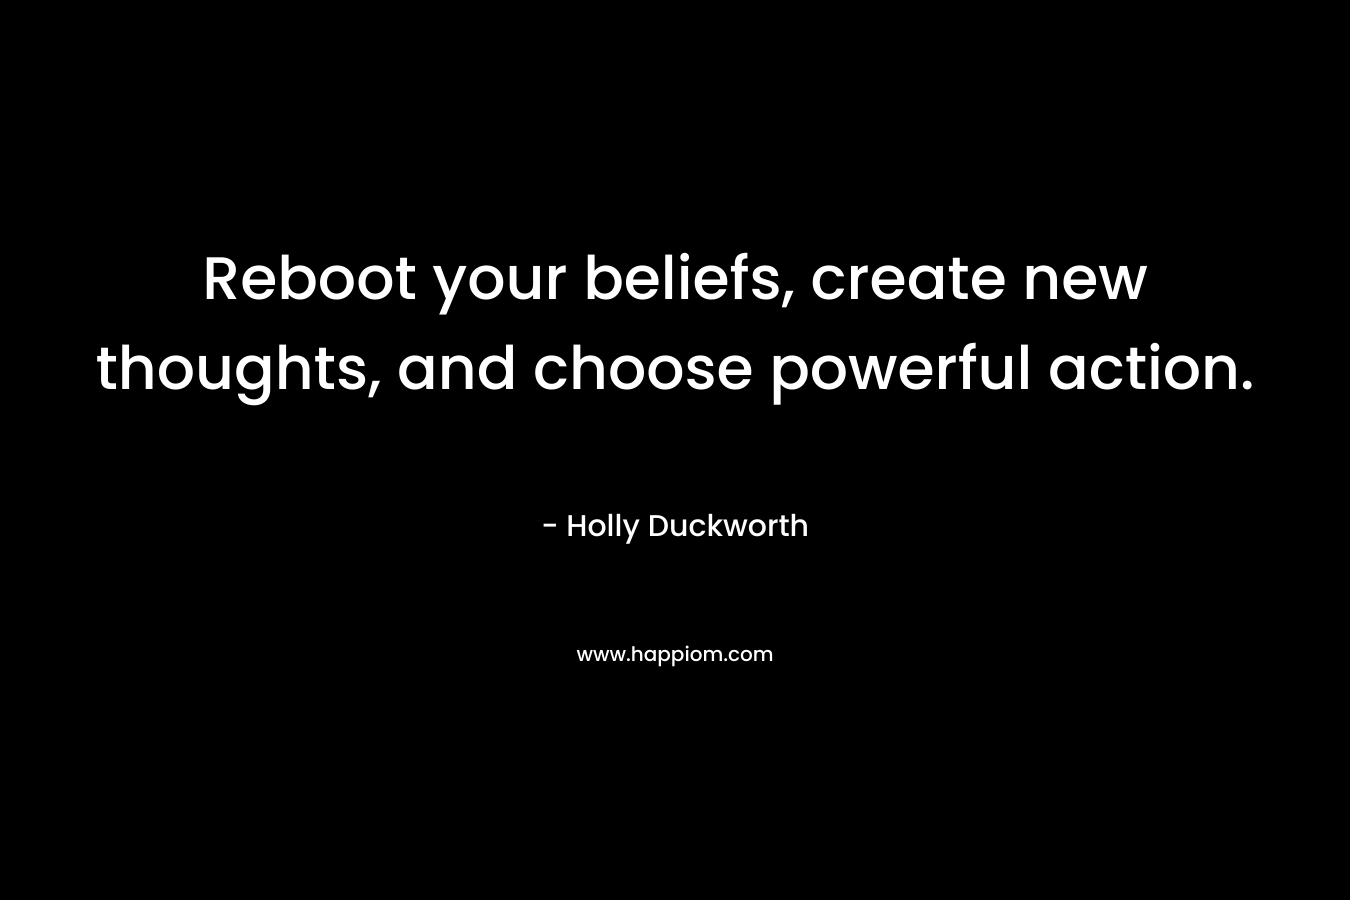 Reboot your beliefs, create new thoughts, and choose powerful action. – Holly Duckworth